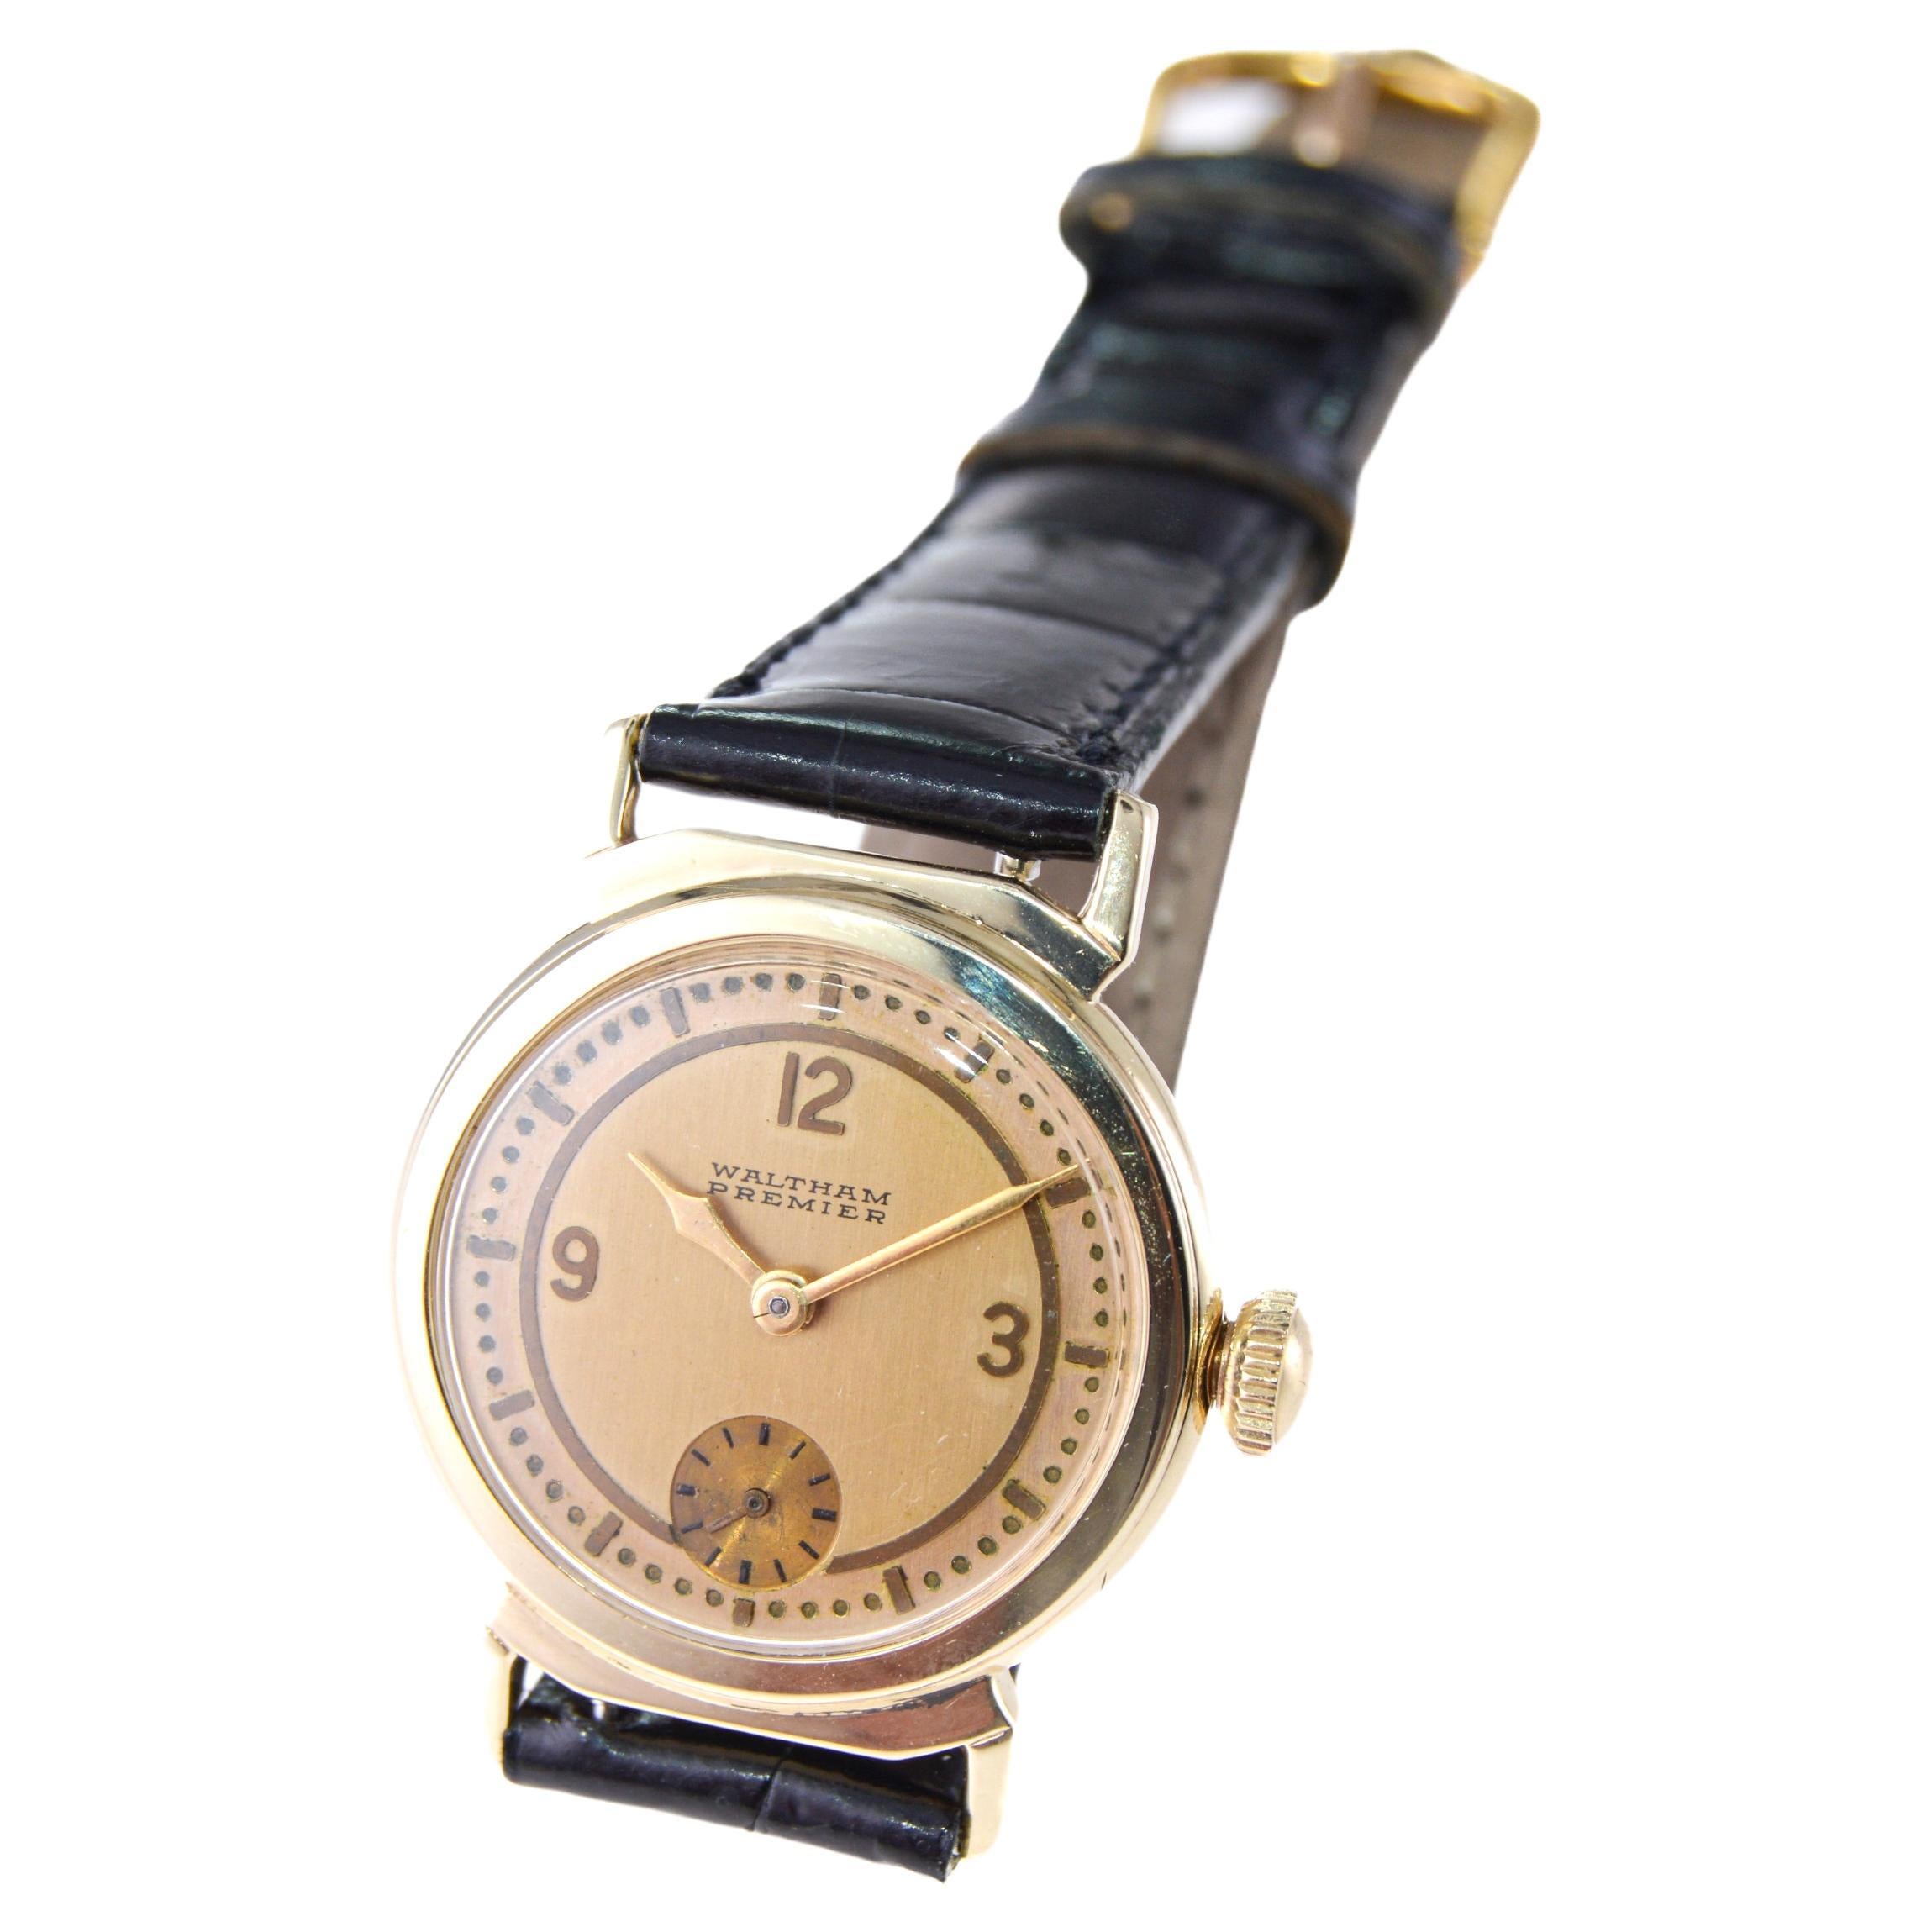 Waltham 14k Solid Gold Rare Art Deco Watch with Original Gold Dial 1935 In Excellent Condition For Sale In Long Beach, CA